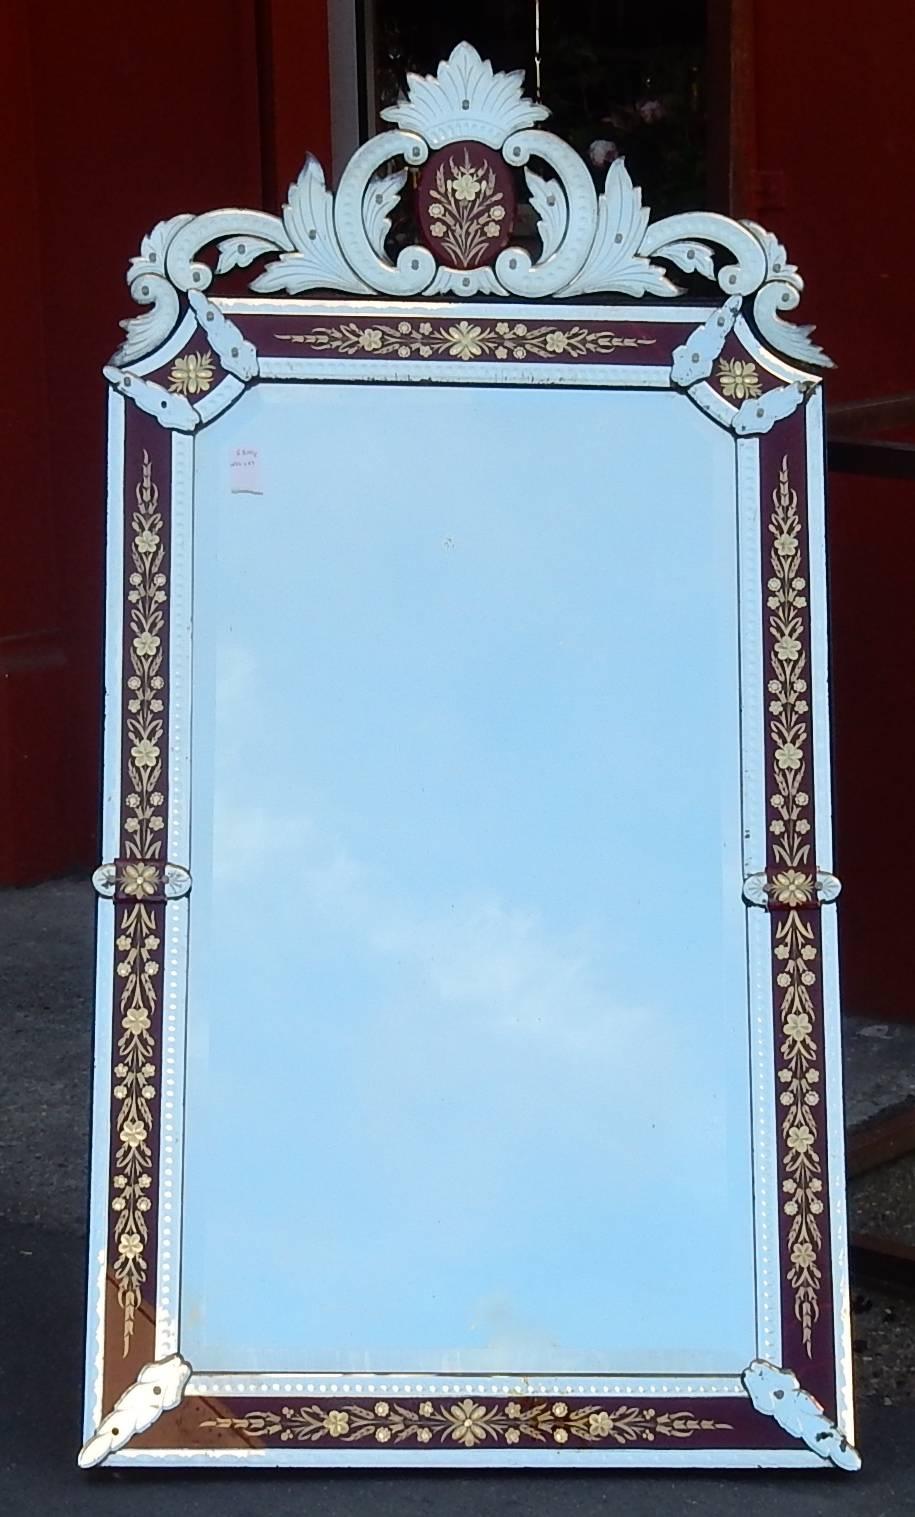 Mirror has front wall, centre beveled with a frame of glass colored there fixed under glass, decoration of flowers and bubbles
Good condition, circa 1880-1900.